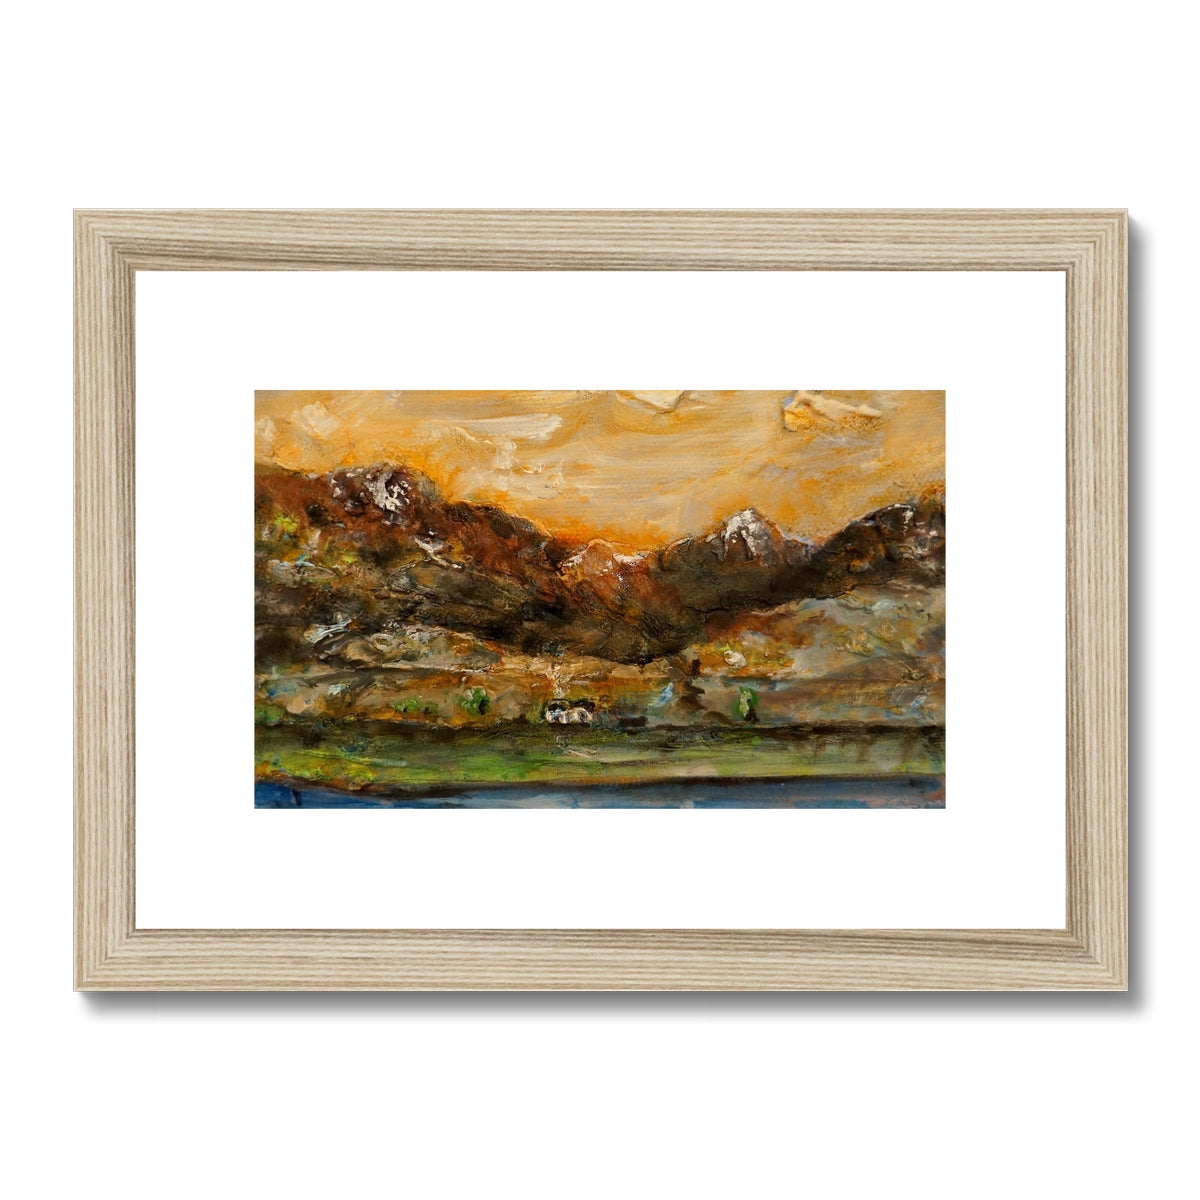 A Glencoe Cottage Painting | Framed & Mounted Prints From Scotland-Framed & Mounted Prints-Glencoe Art Gallery-A4 Landscape-Natural Frame-Paintings, Prints, Homeware, Art Gifts From Scotland By Scottish Artist Kevin Hunter